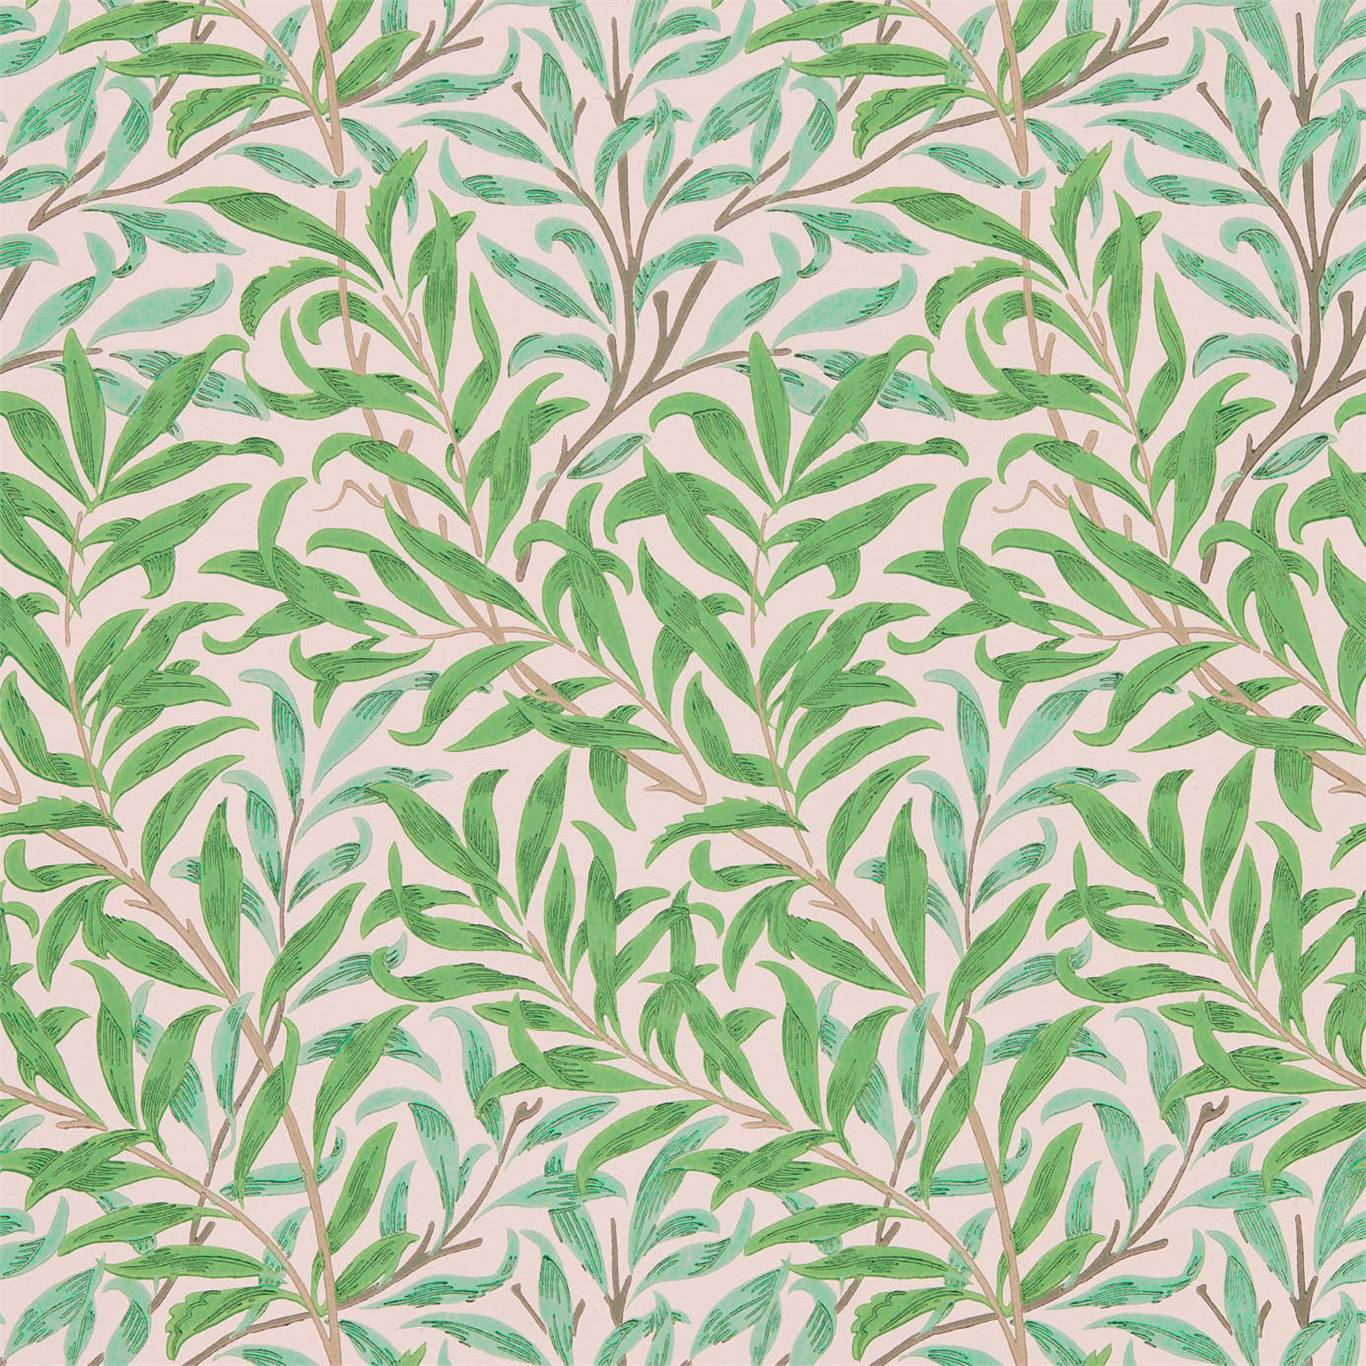 William Morris Willow Bough Wallpaper DBPW216949 by Morris & Co